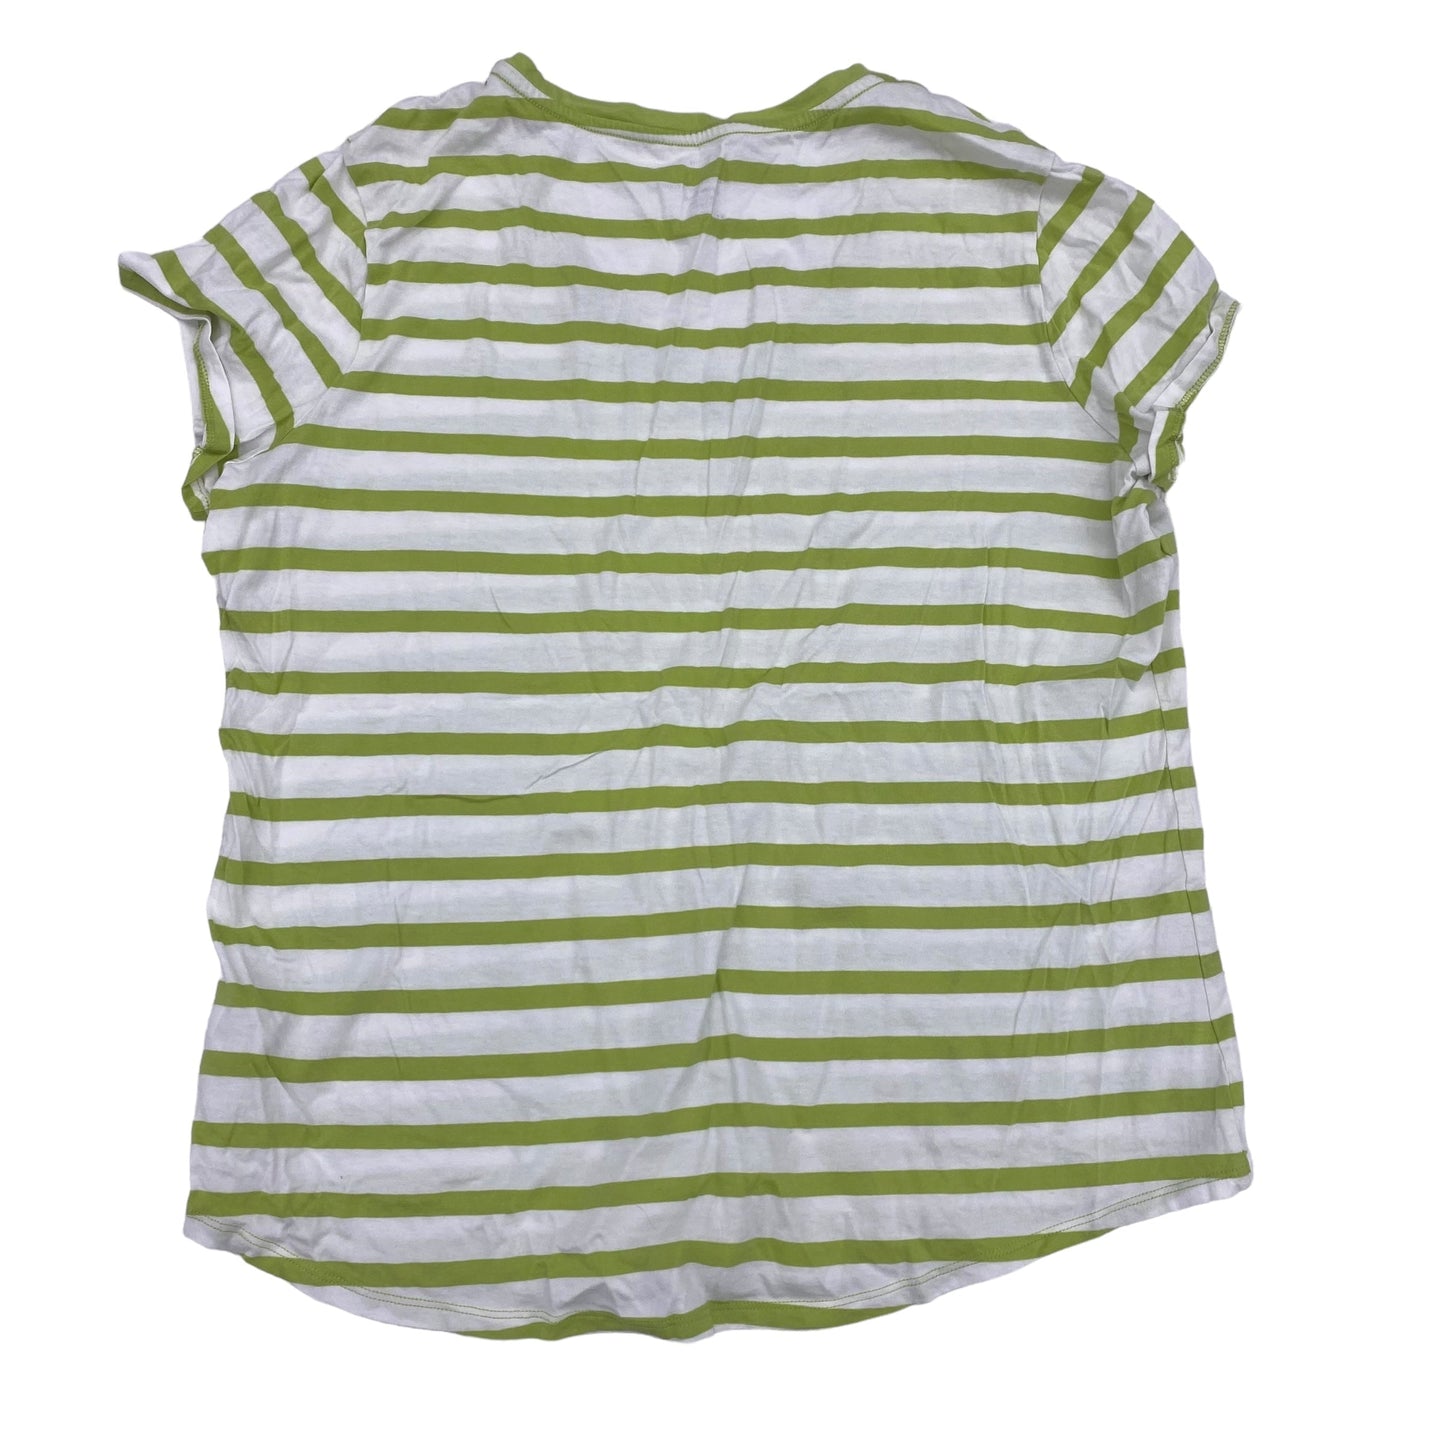 GREEN & WHITE TOP SS by FADED GLORY Size:2X